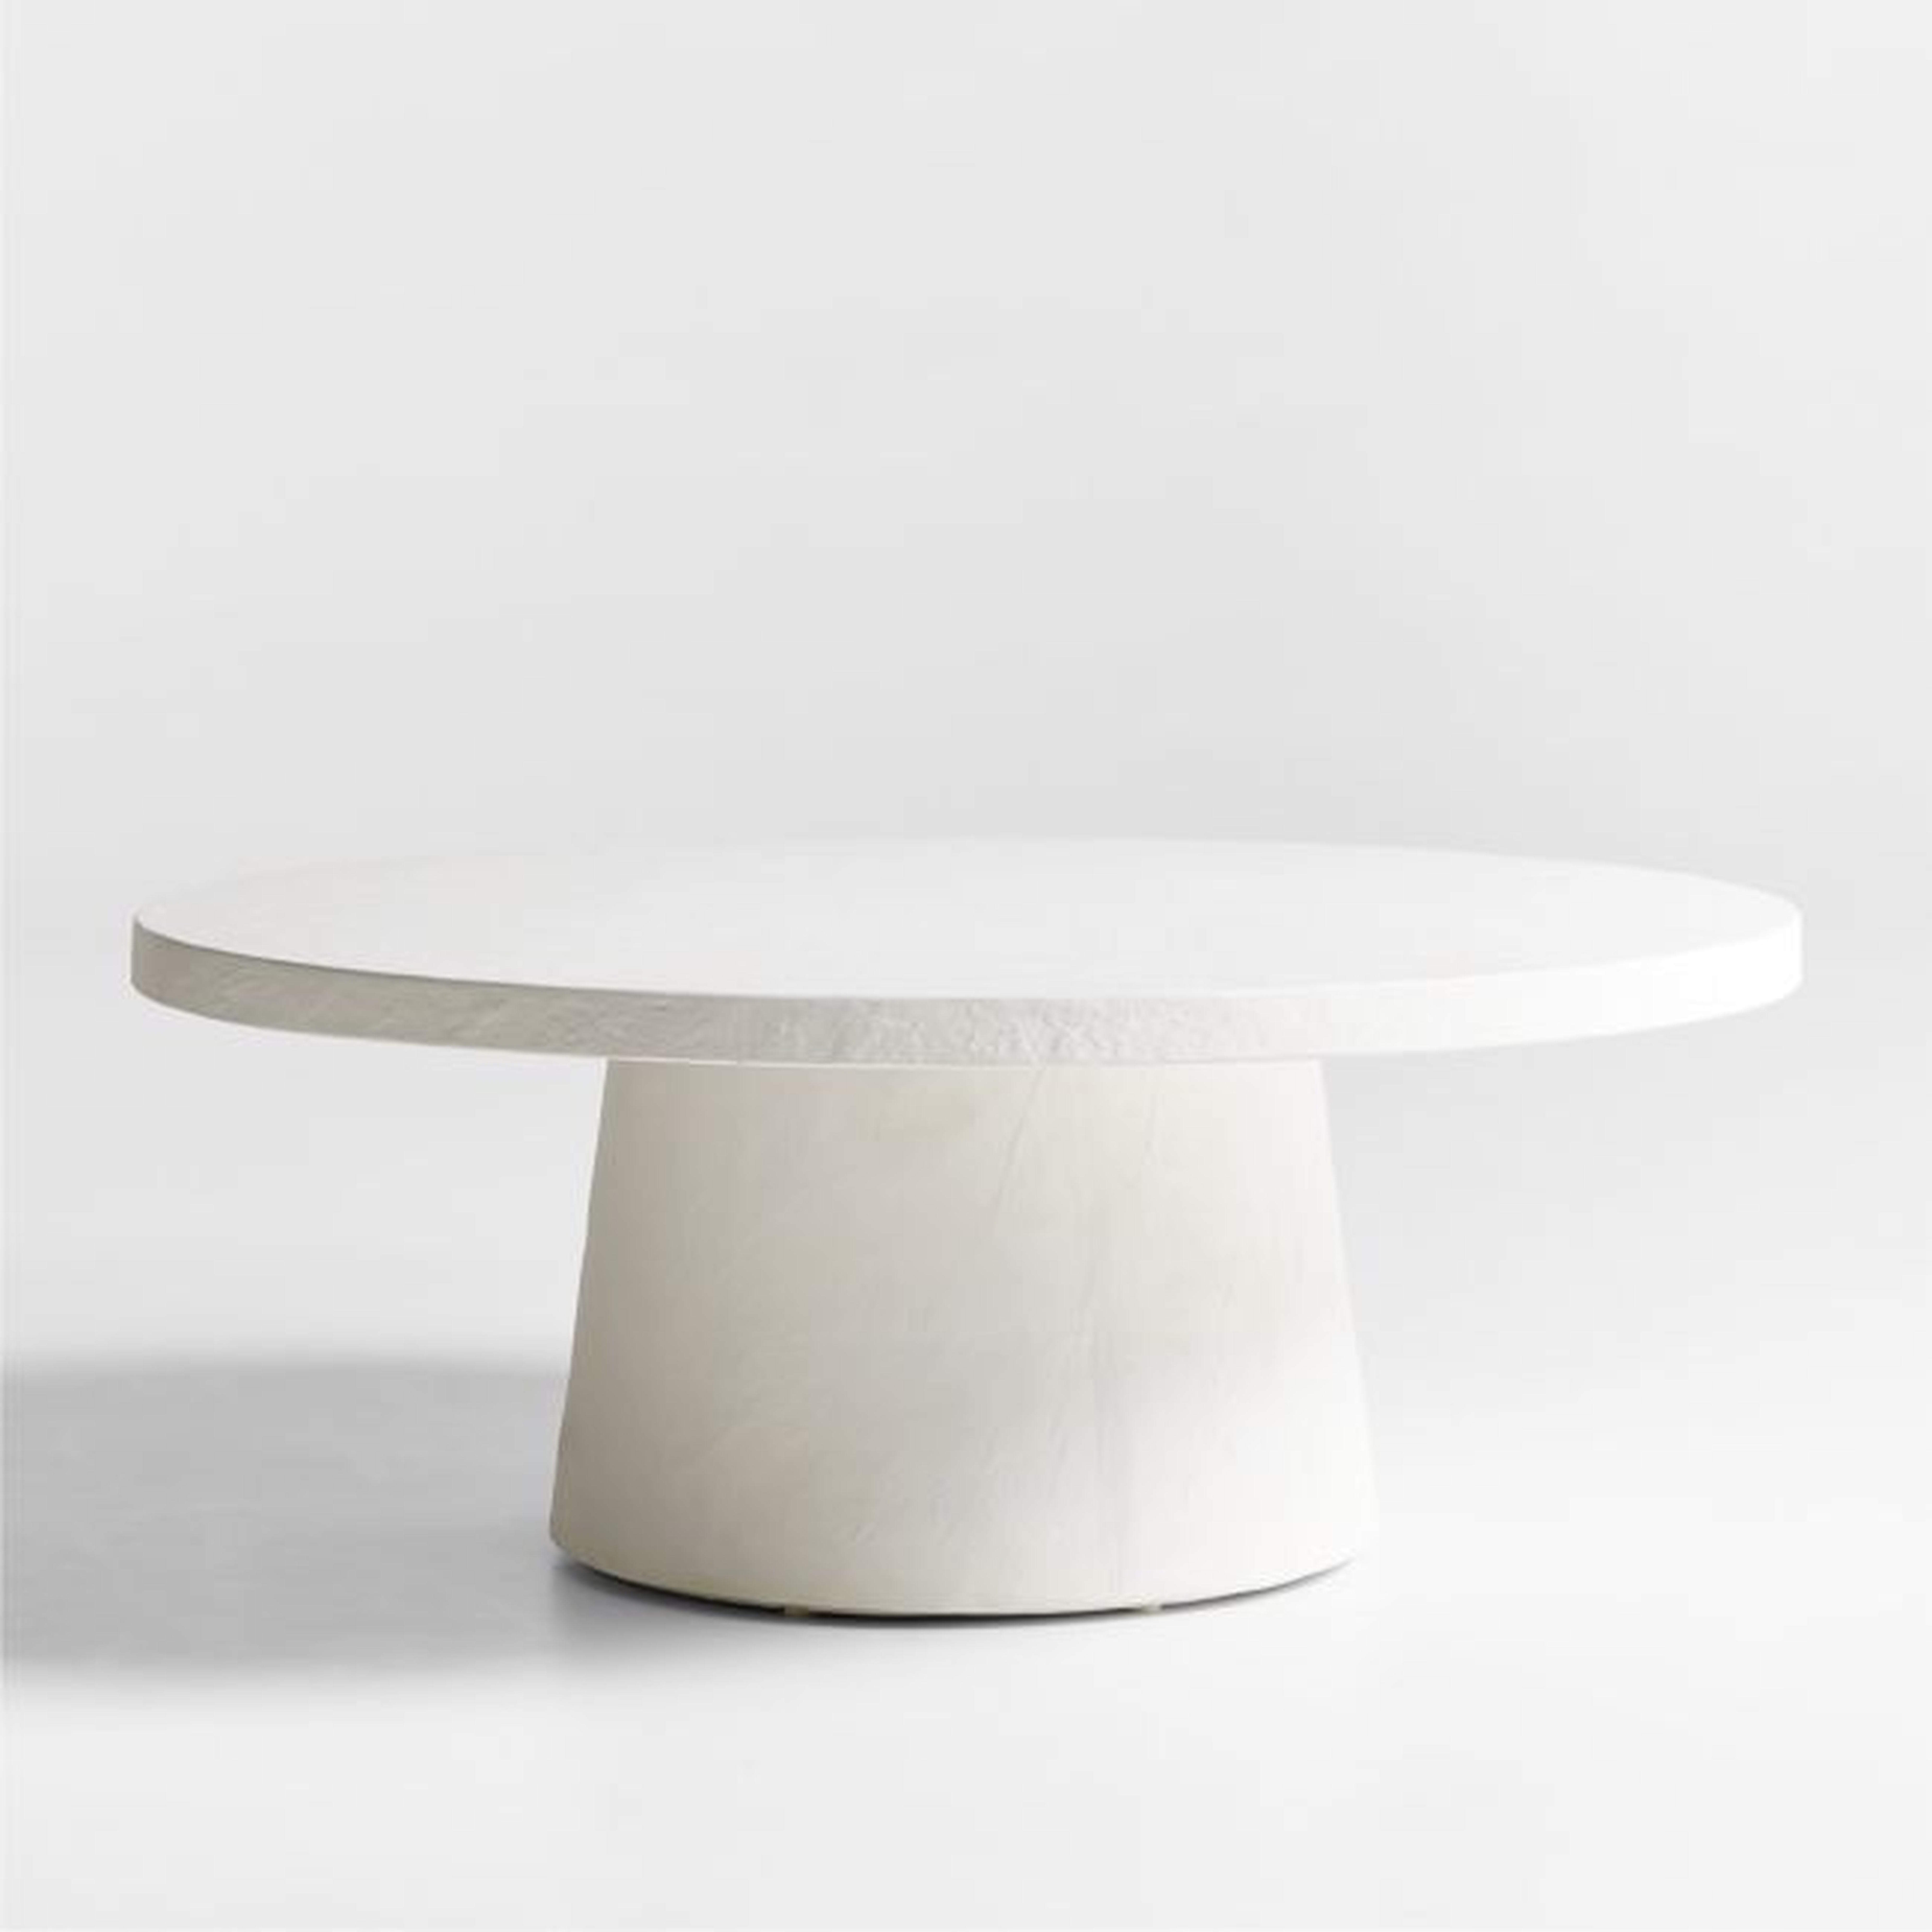 Willy White Concrete 44" Round Pedestal Coffee Table by Leanne Ford - Crate and Barrel